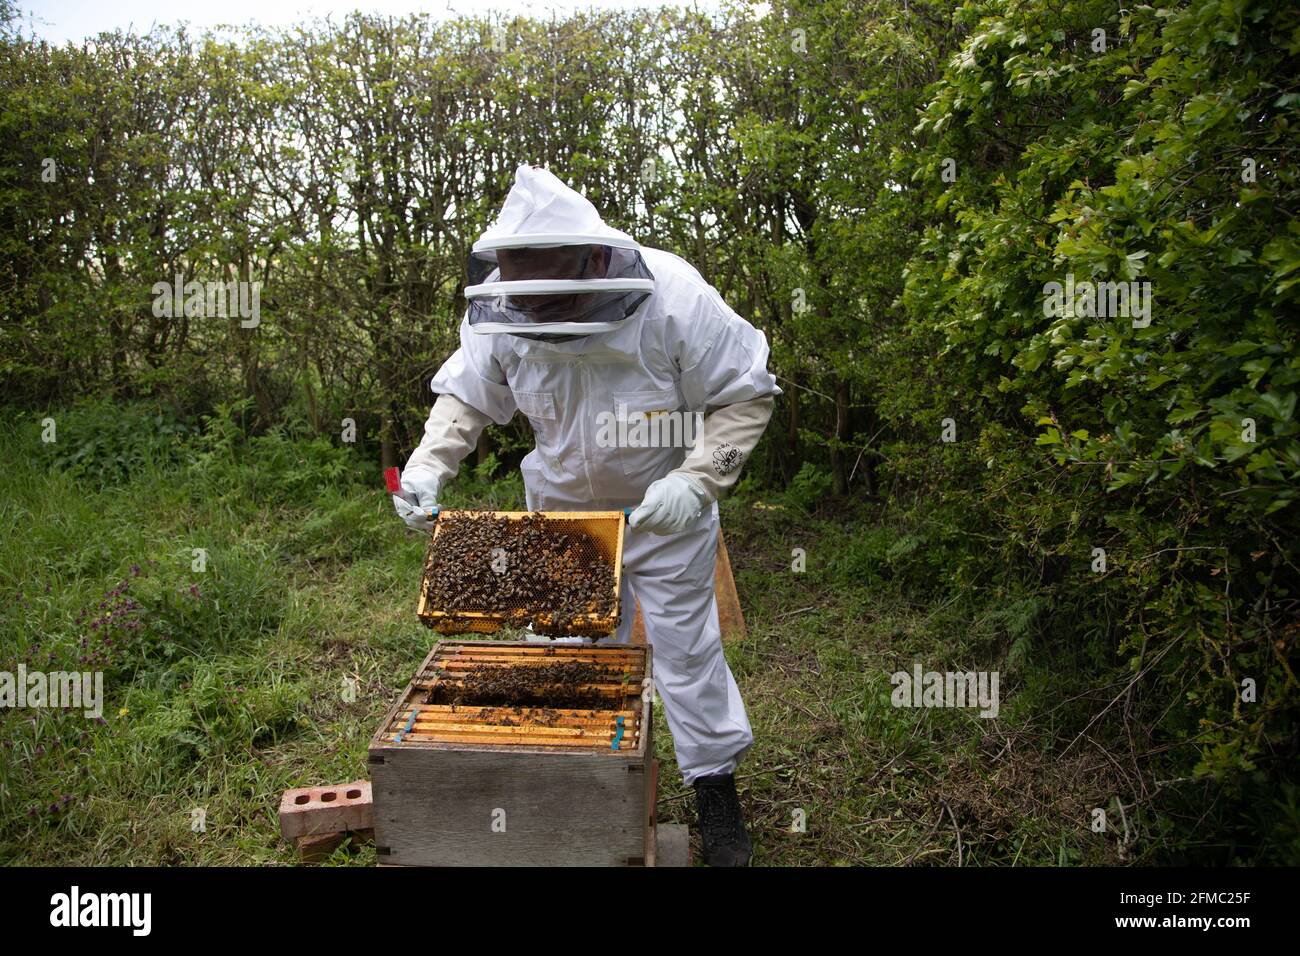 Brood frames from a bee hive being removed for inspection showing worker bees tending the cells. Stock Photo